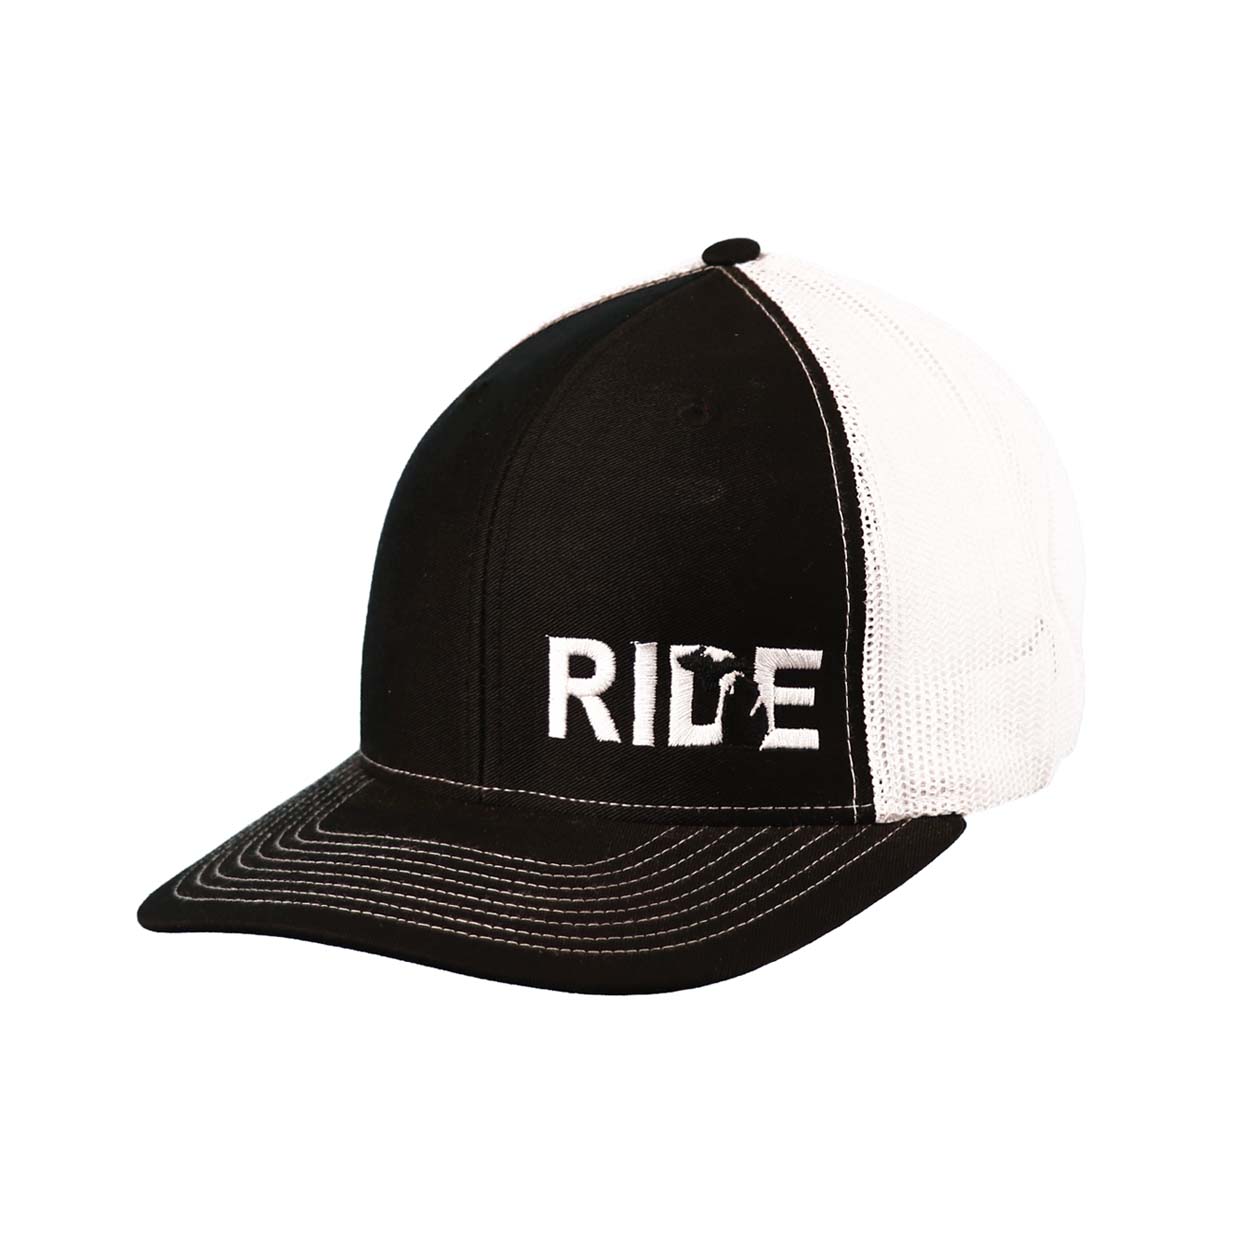 Ride Michigan Night Out Embroidered Snapback Trucker Hat Black/White